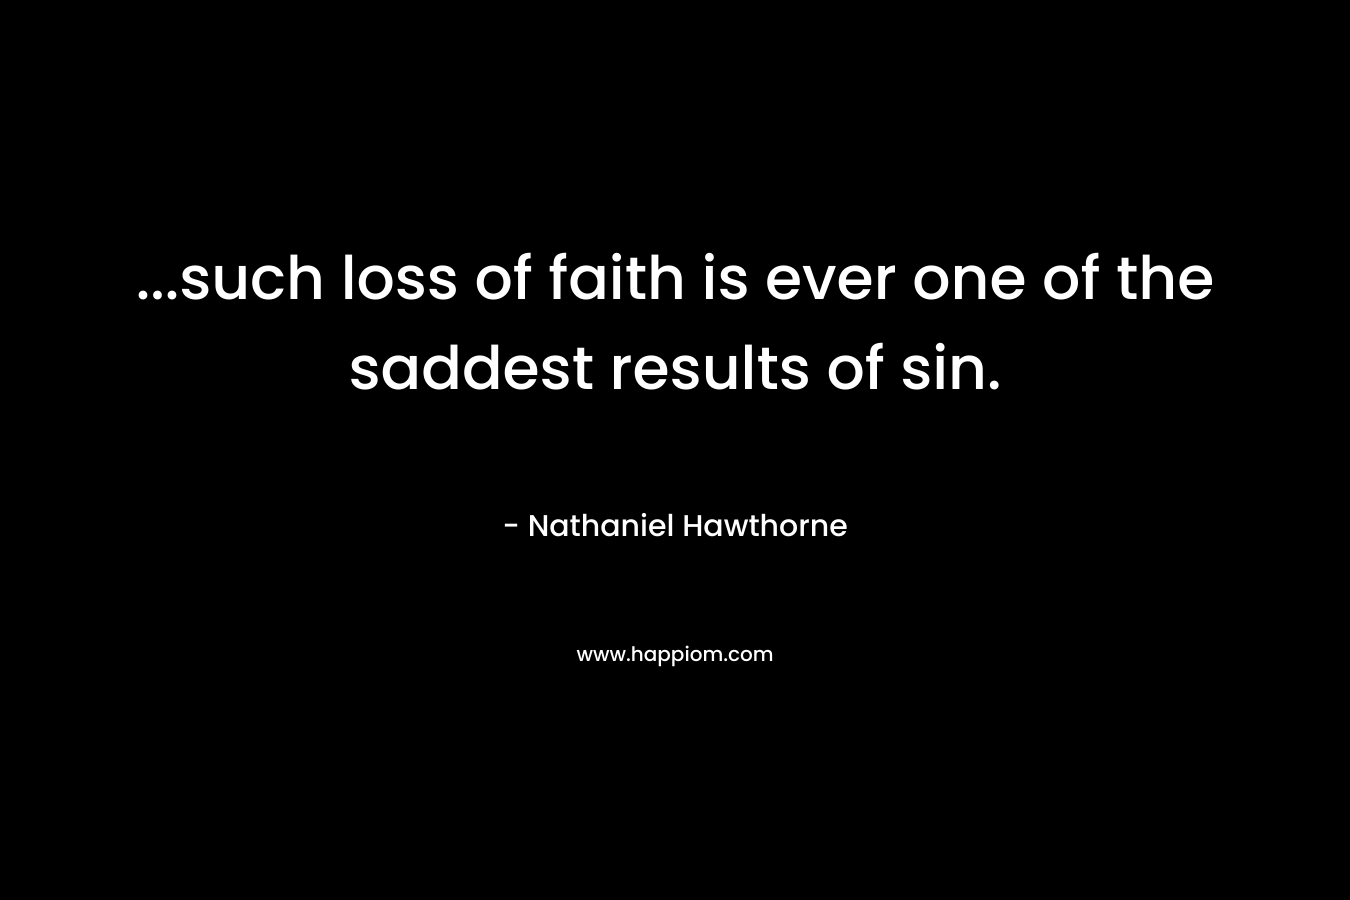 …such loss of faith is ever one of the saddest results of sin. – Nathaniel Hawthorne